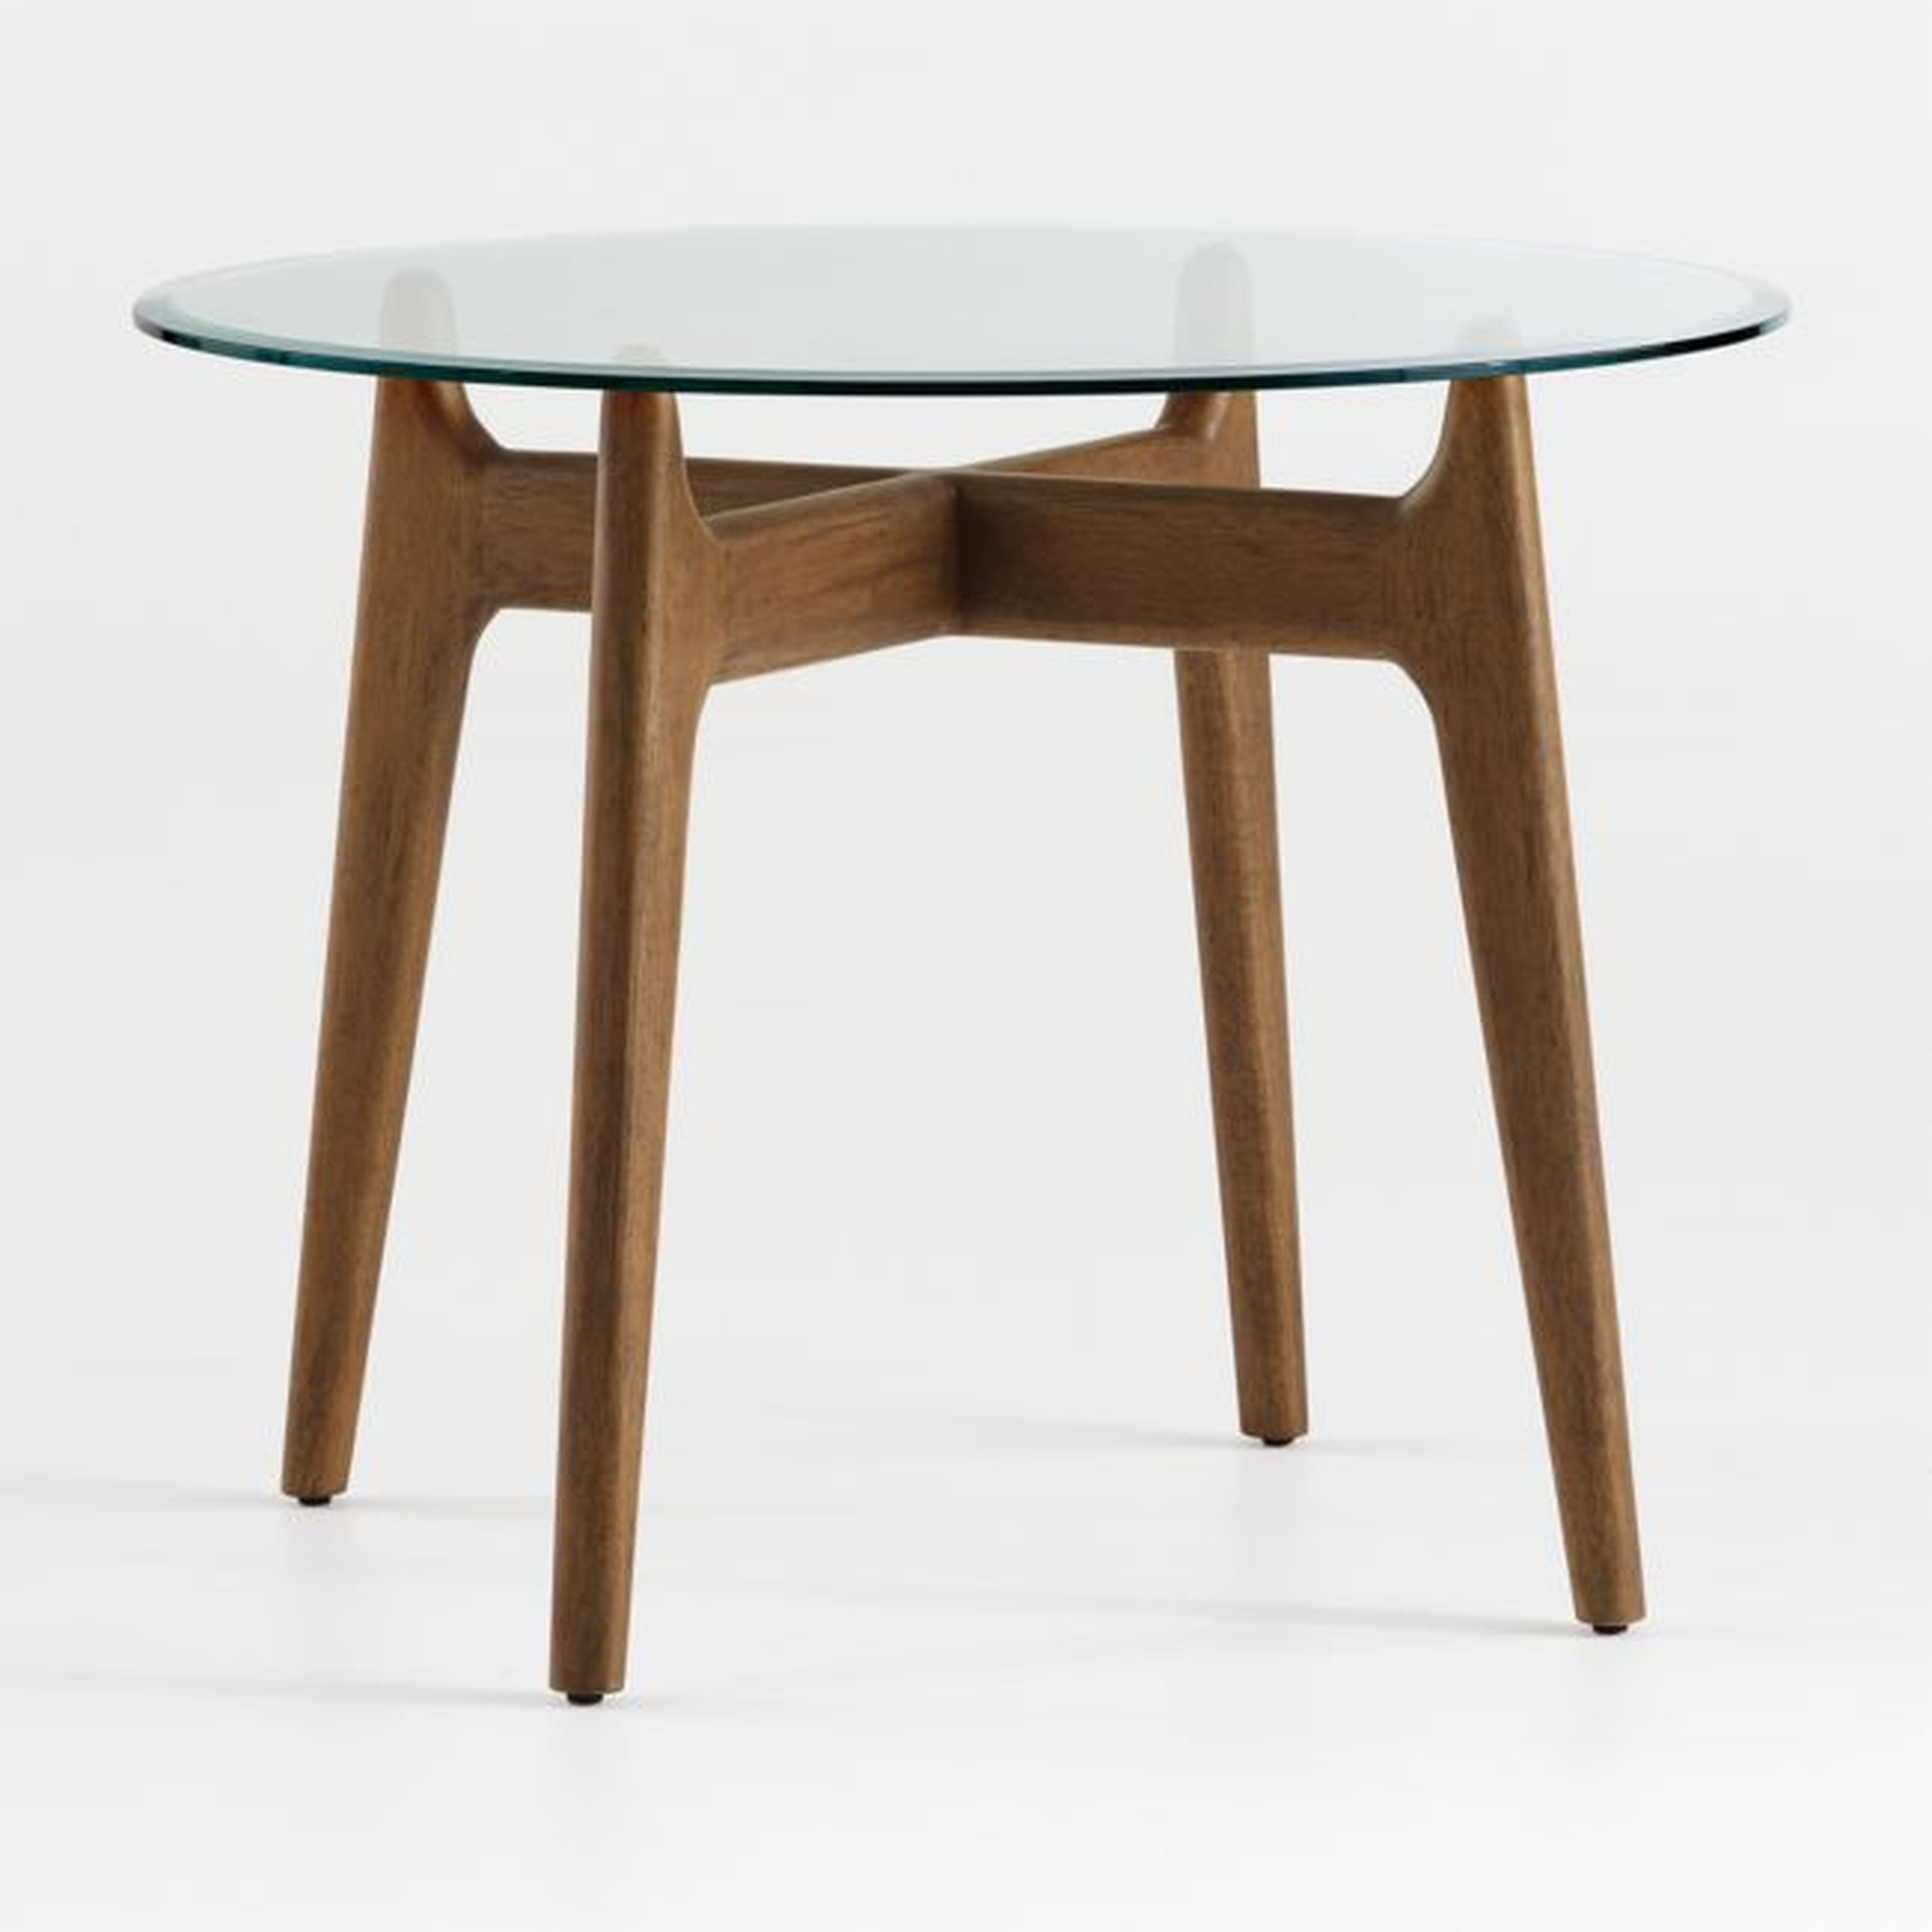 Tate 38" Round Dining Table with Glass Top and Walnut Base - Crate and Barrel